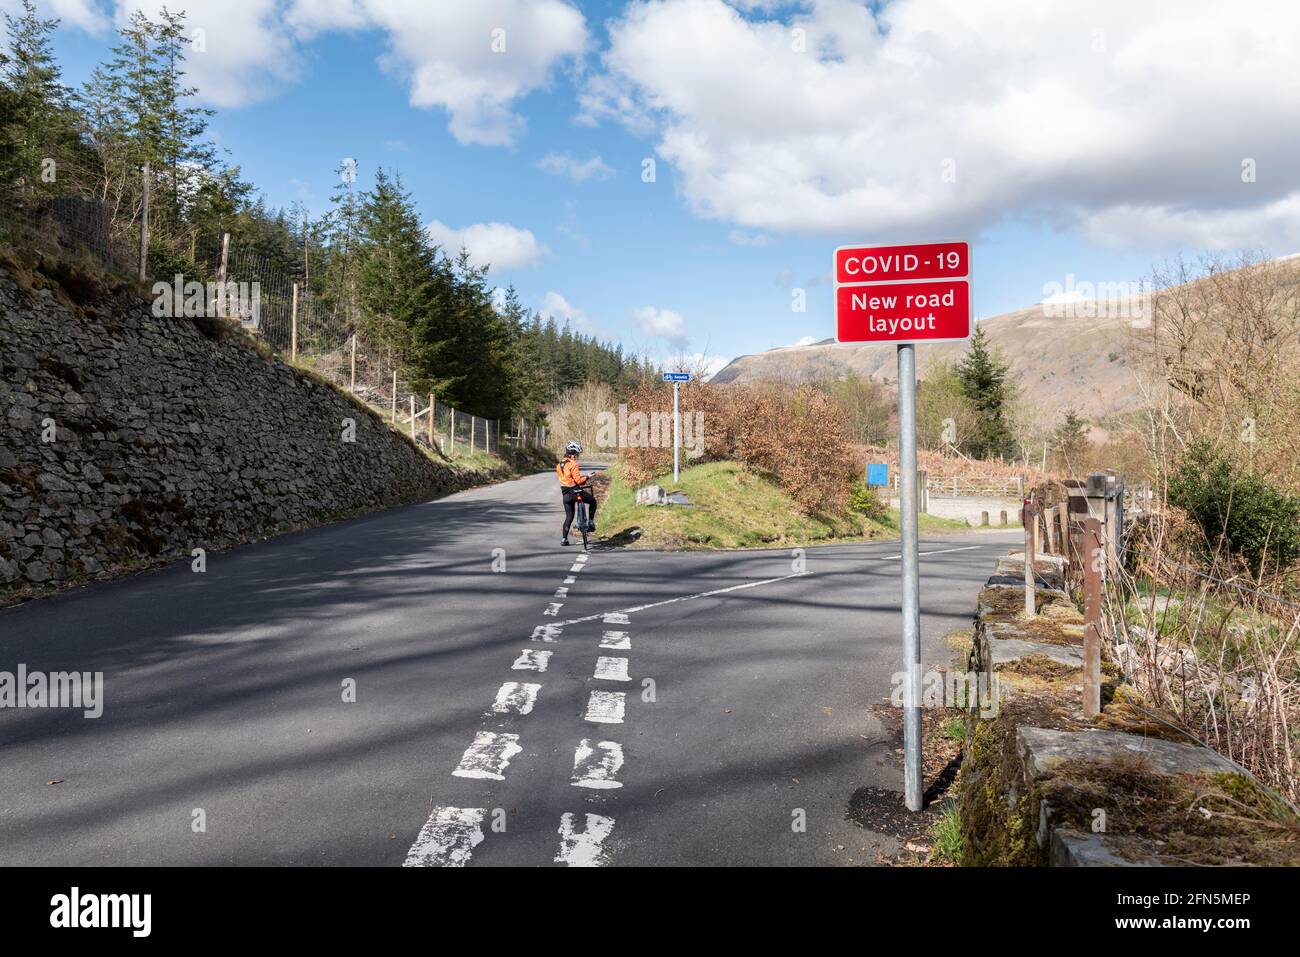 Covid 19 sign warning of new road layout at Thirlmere dam, Lake District, UK. Stock Photo